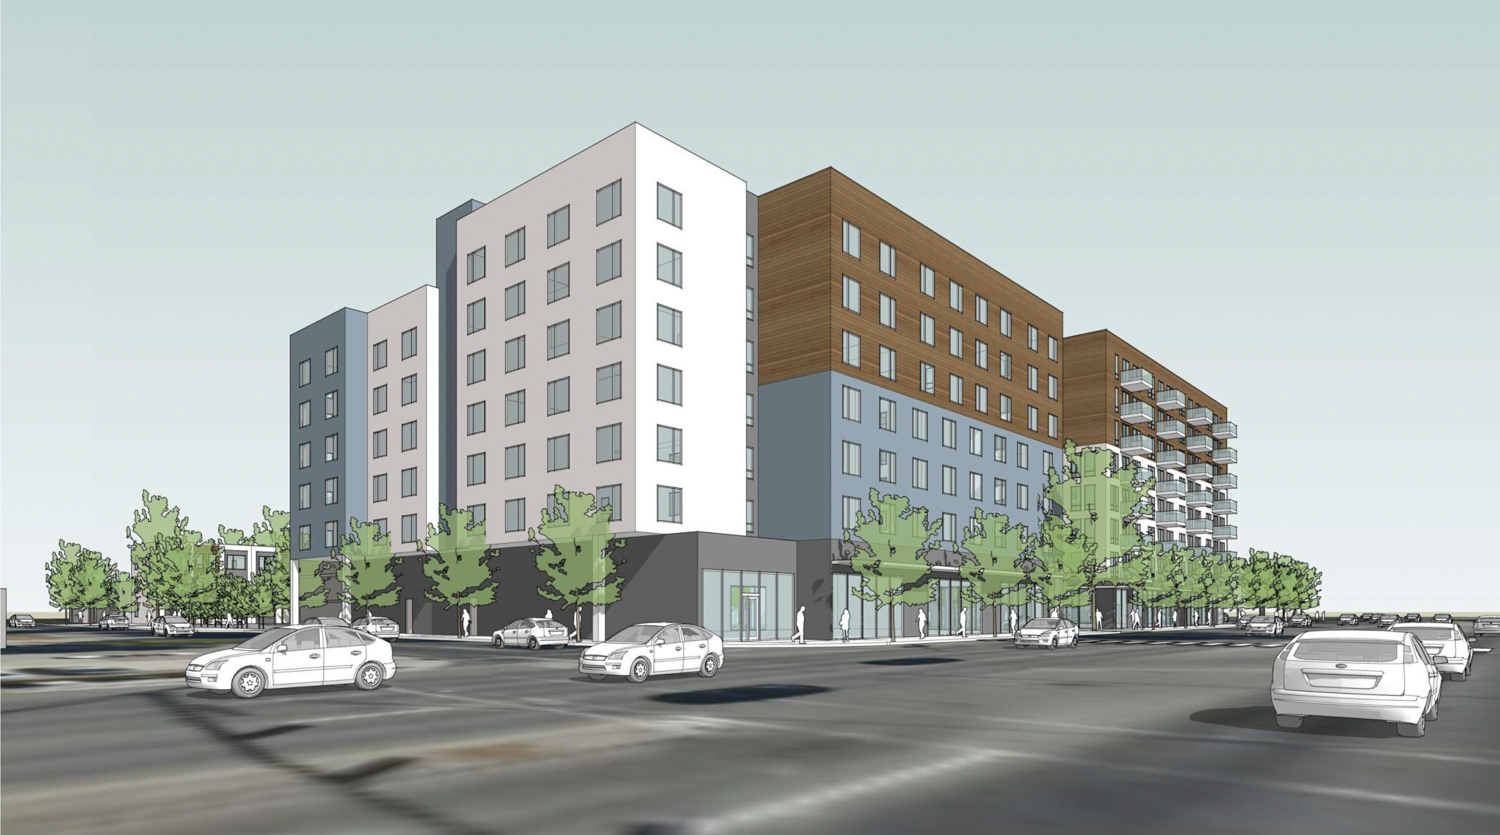 3400 El Camino Real hotel, rendering by Lowney Architecture